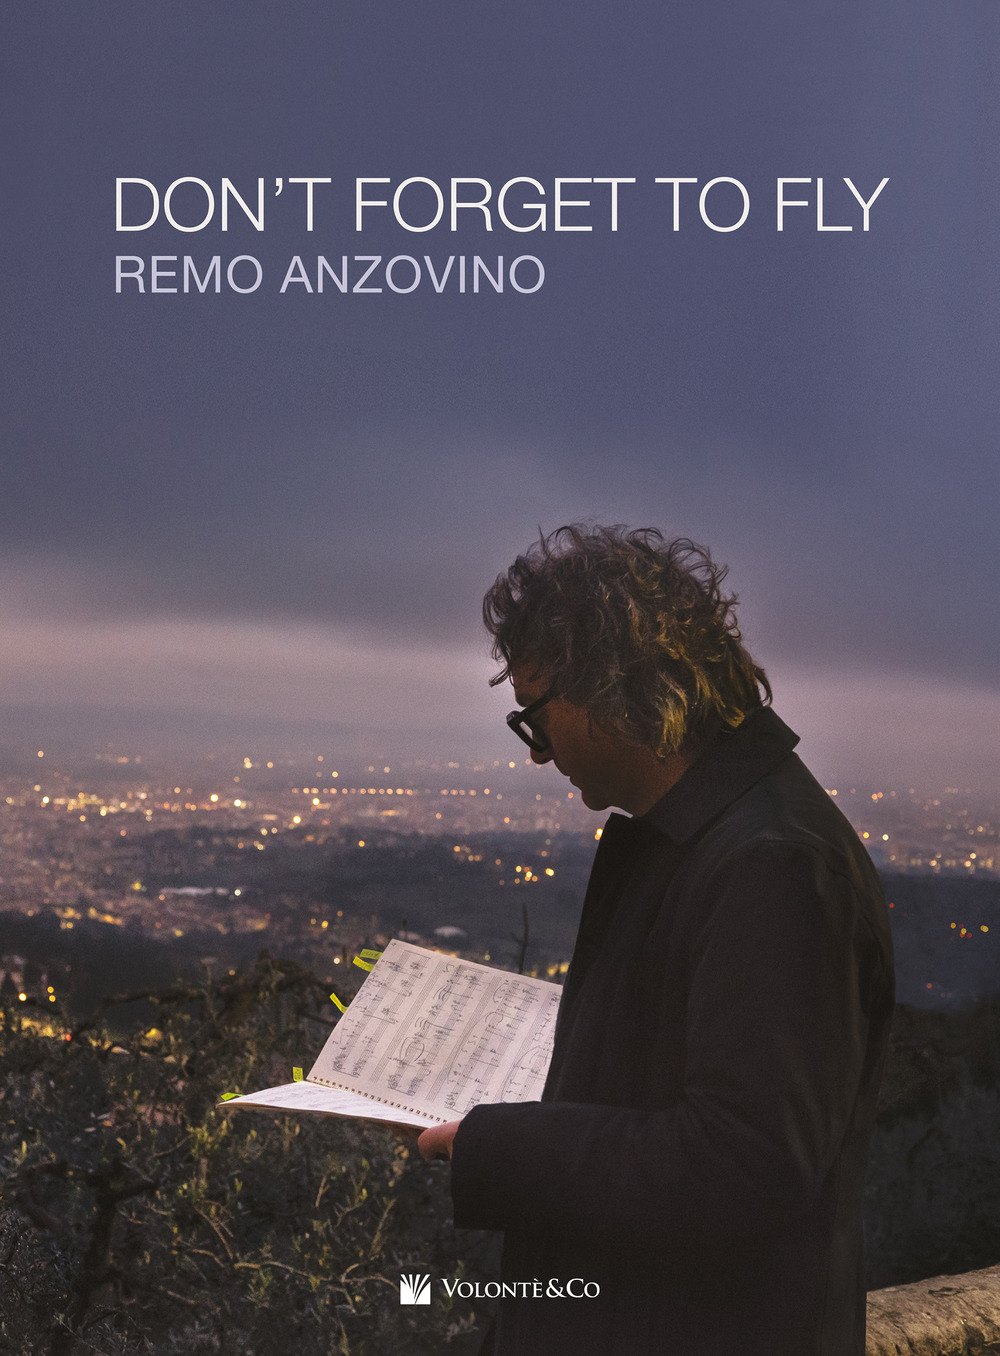 Don't forget to fly